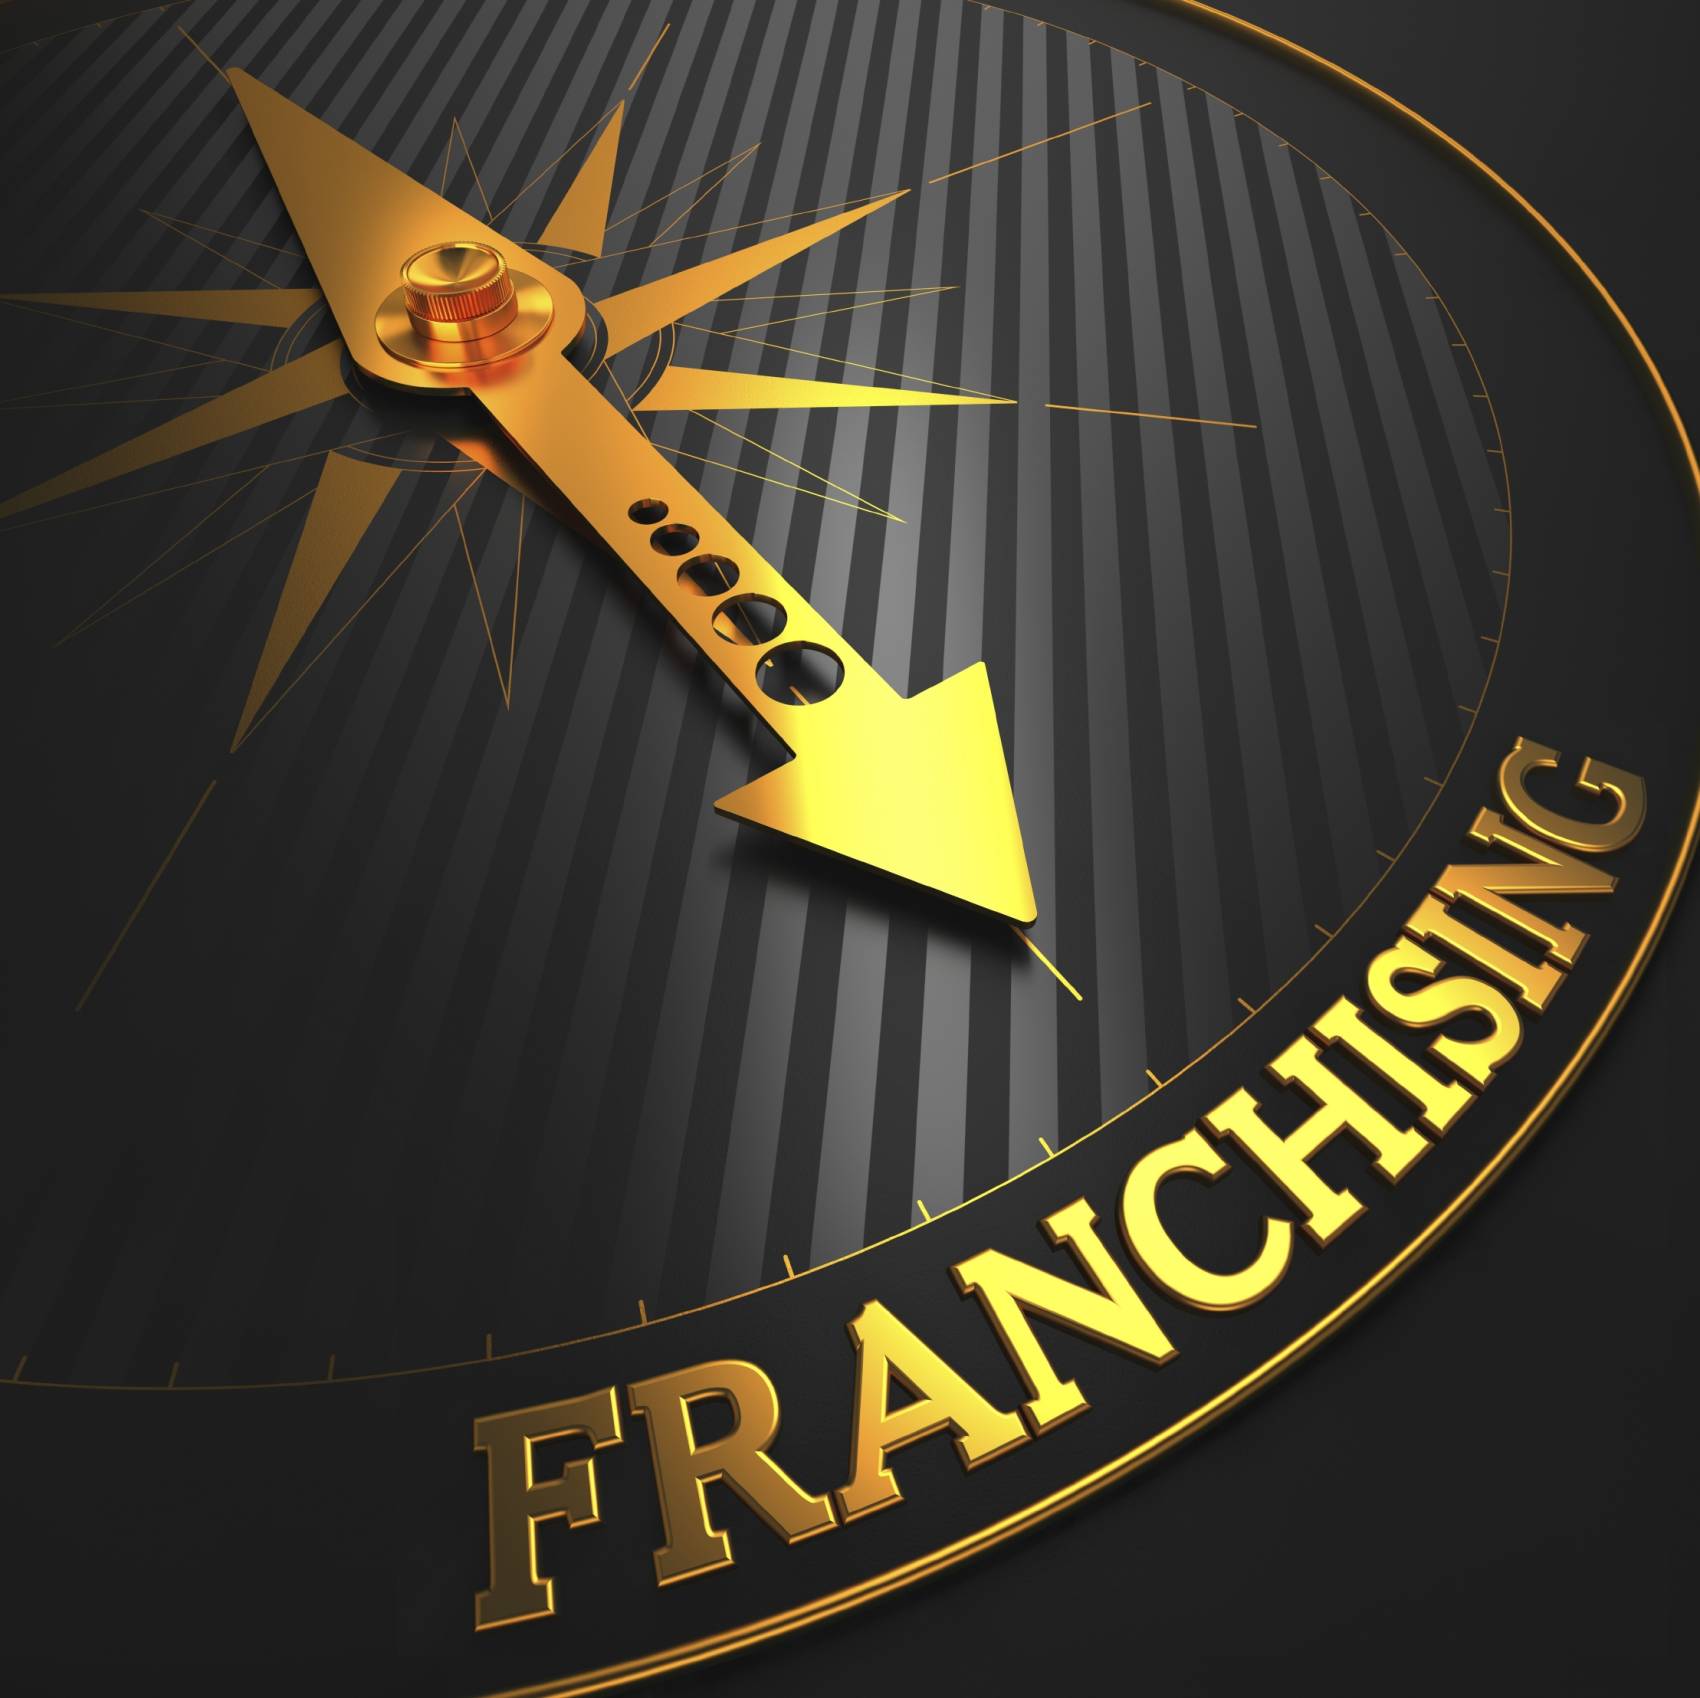 Franchisee background check